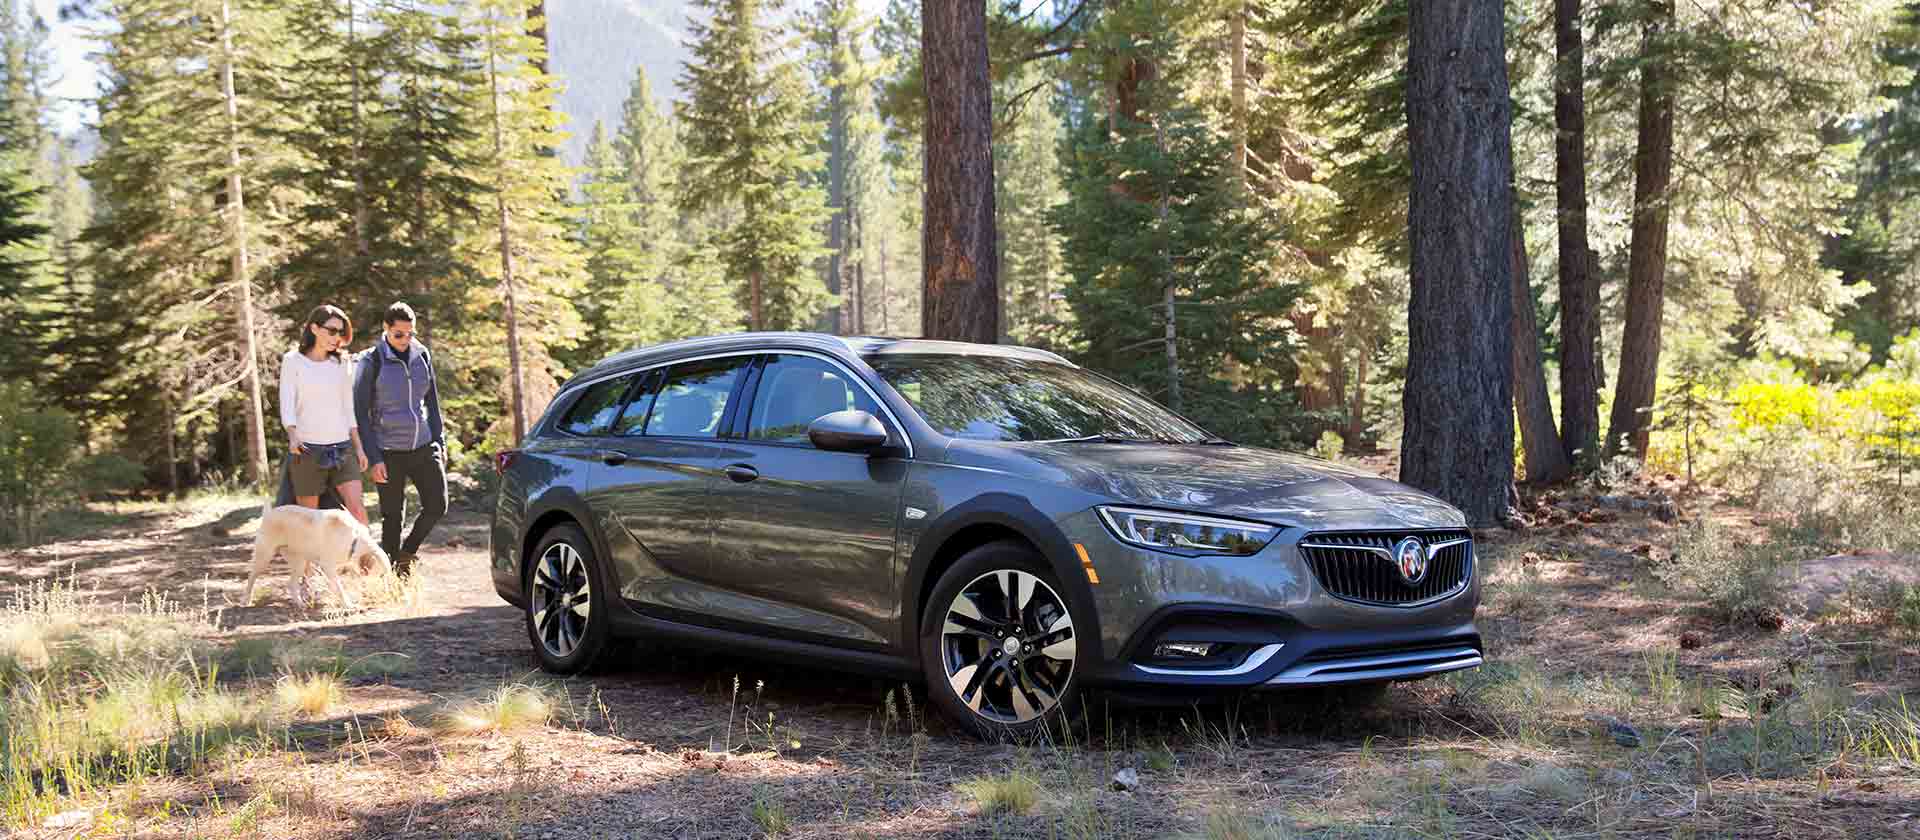 2019 Buick Regal TourX Overview - The News Wheel